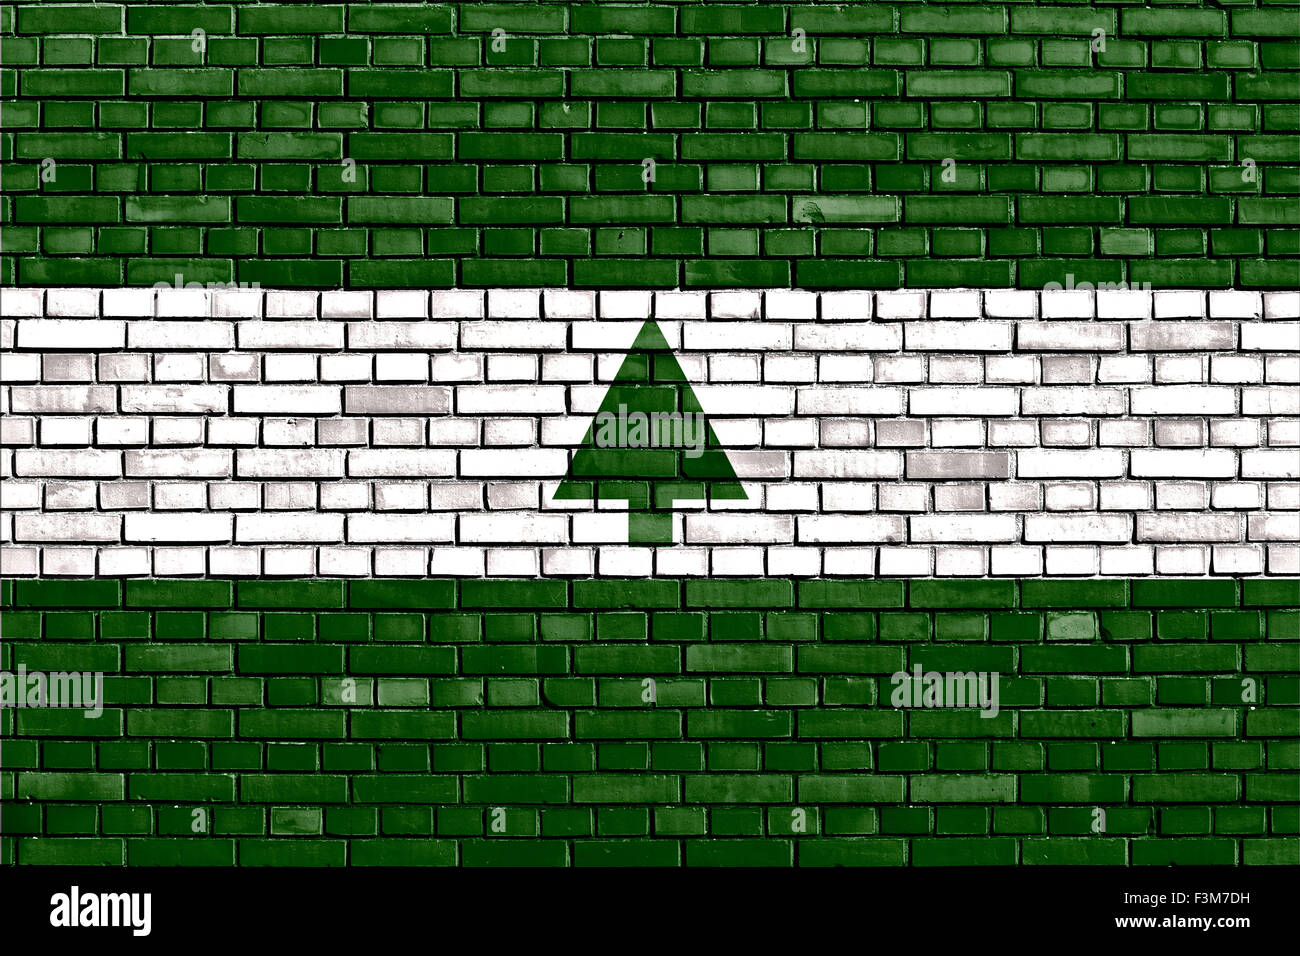 flag of Greenbelt painted on brick wall Stock Photo